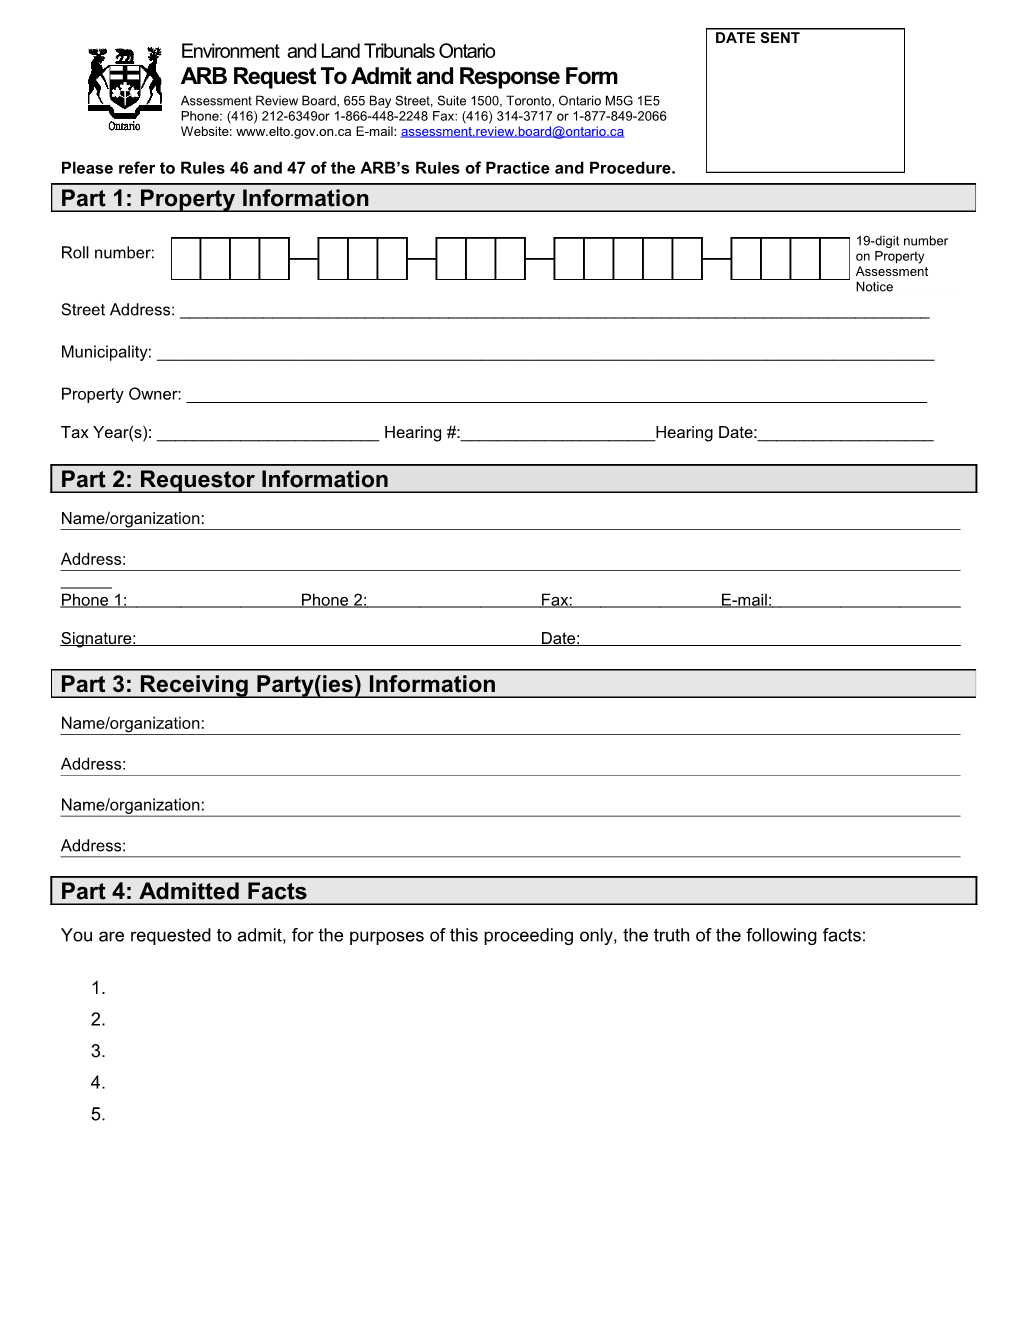 ARB Request to Admit and Response Form